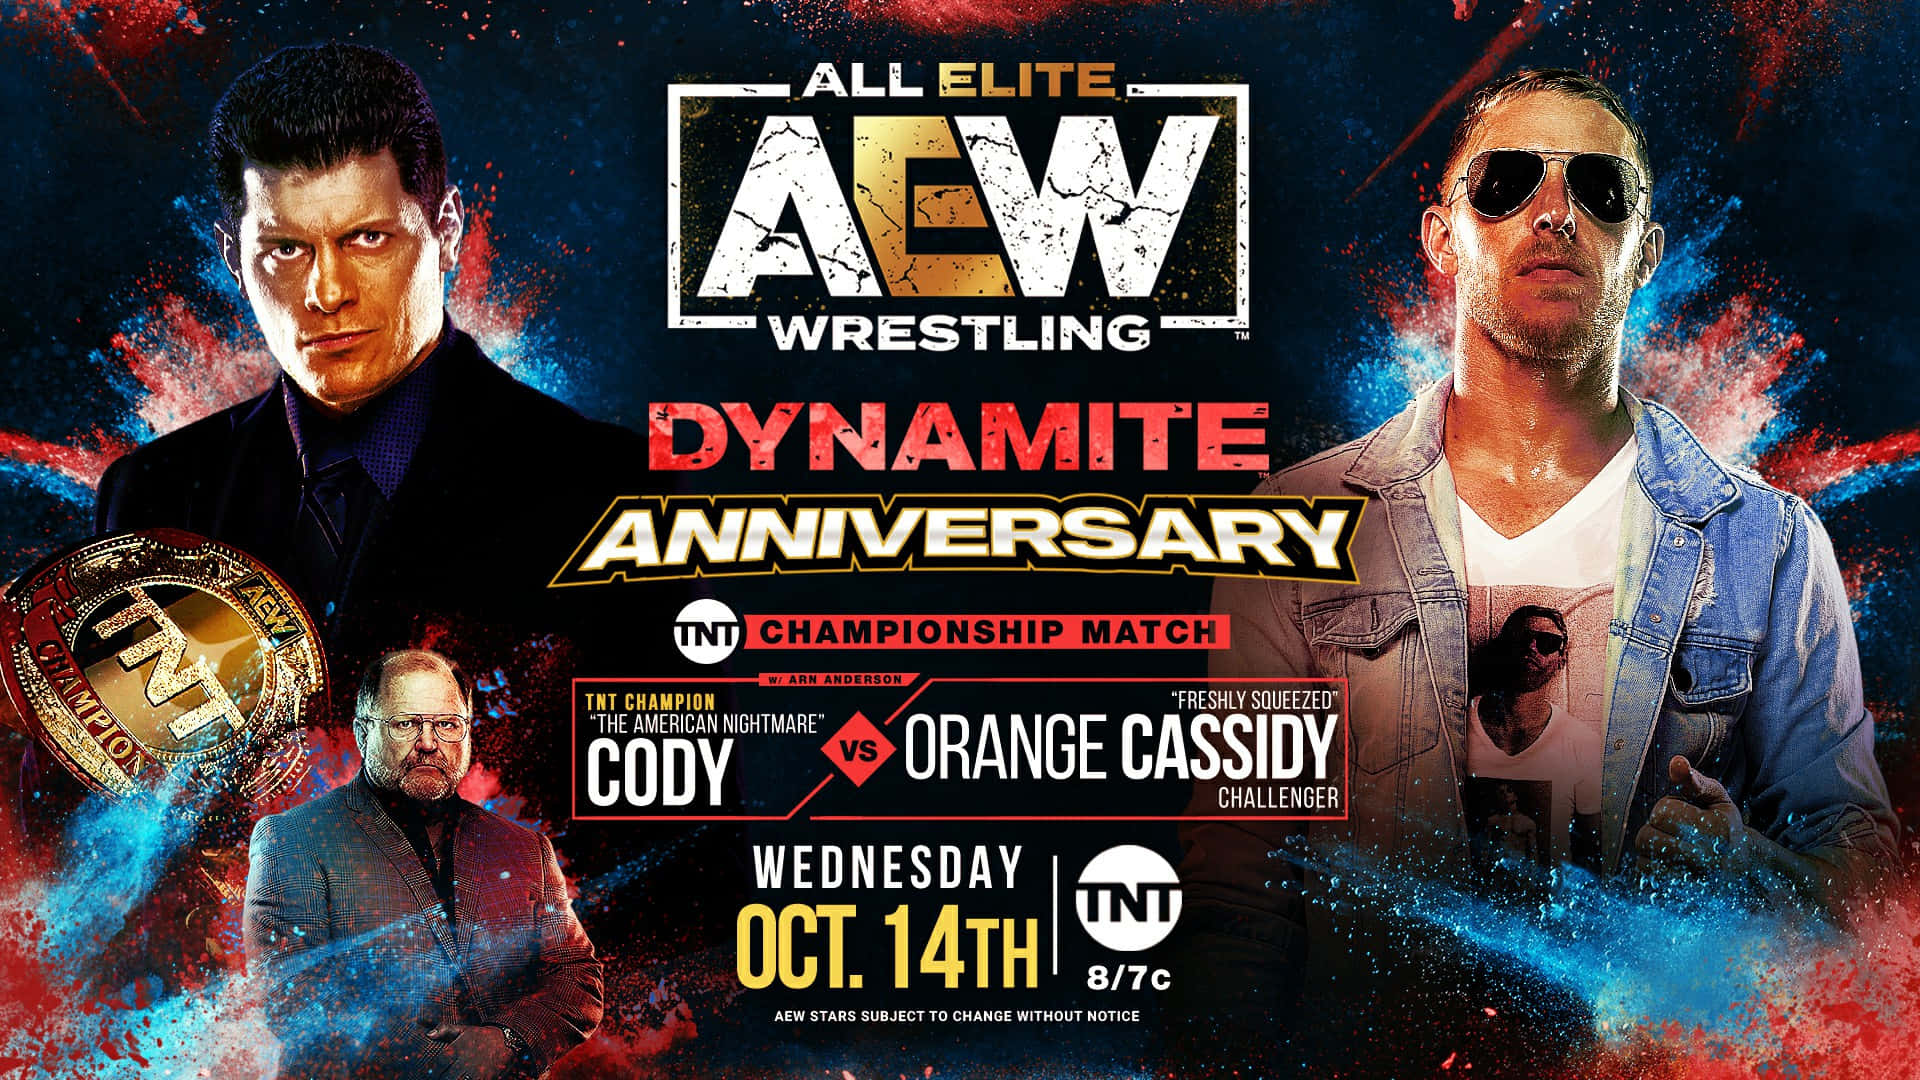 Arn Anderson Aew Dynamite Anniversary Poster Background